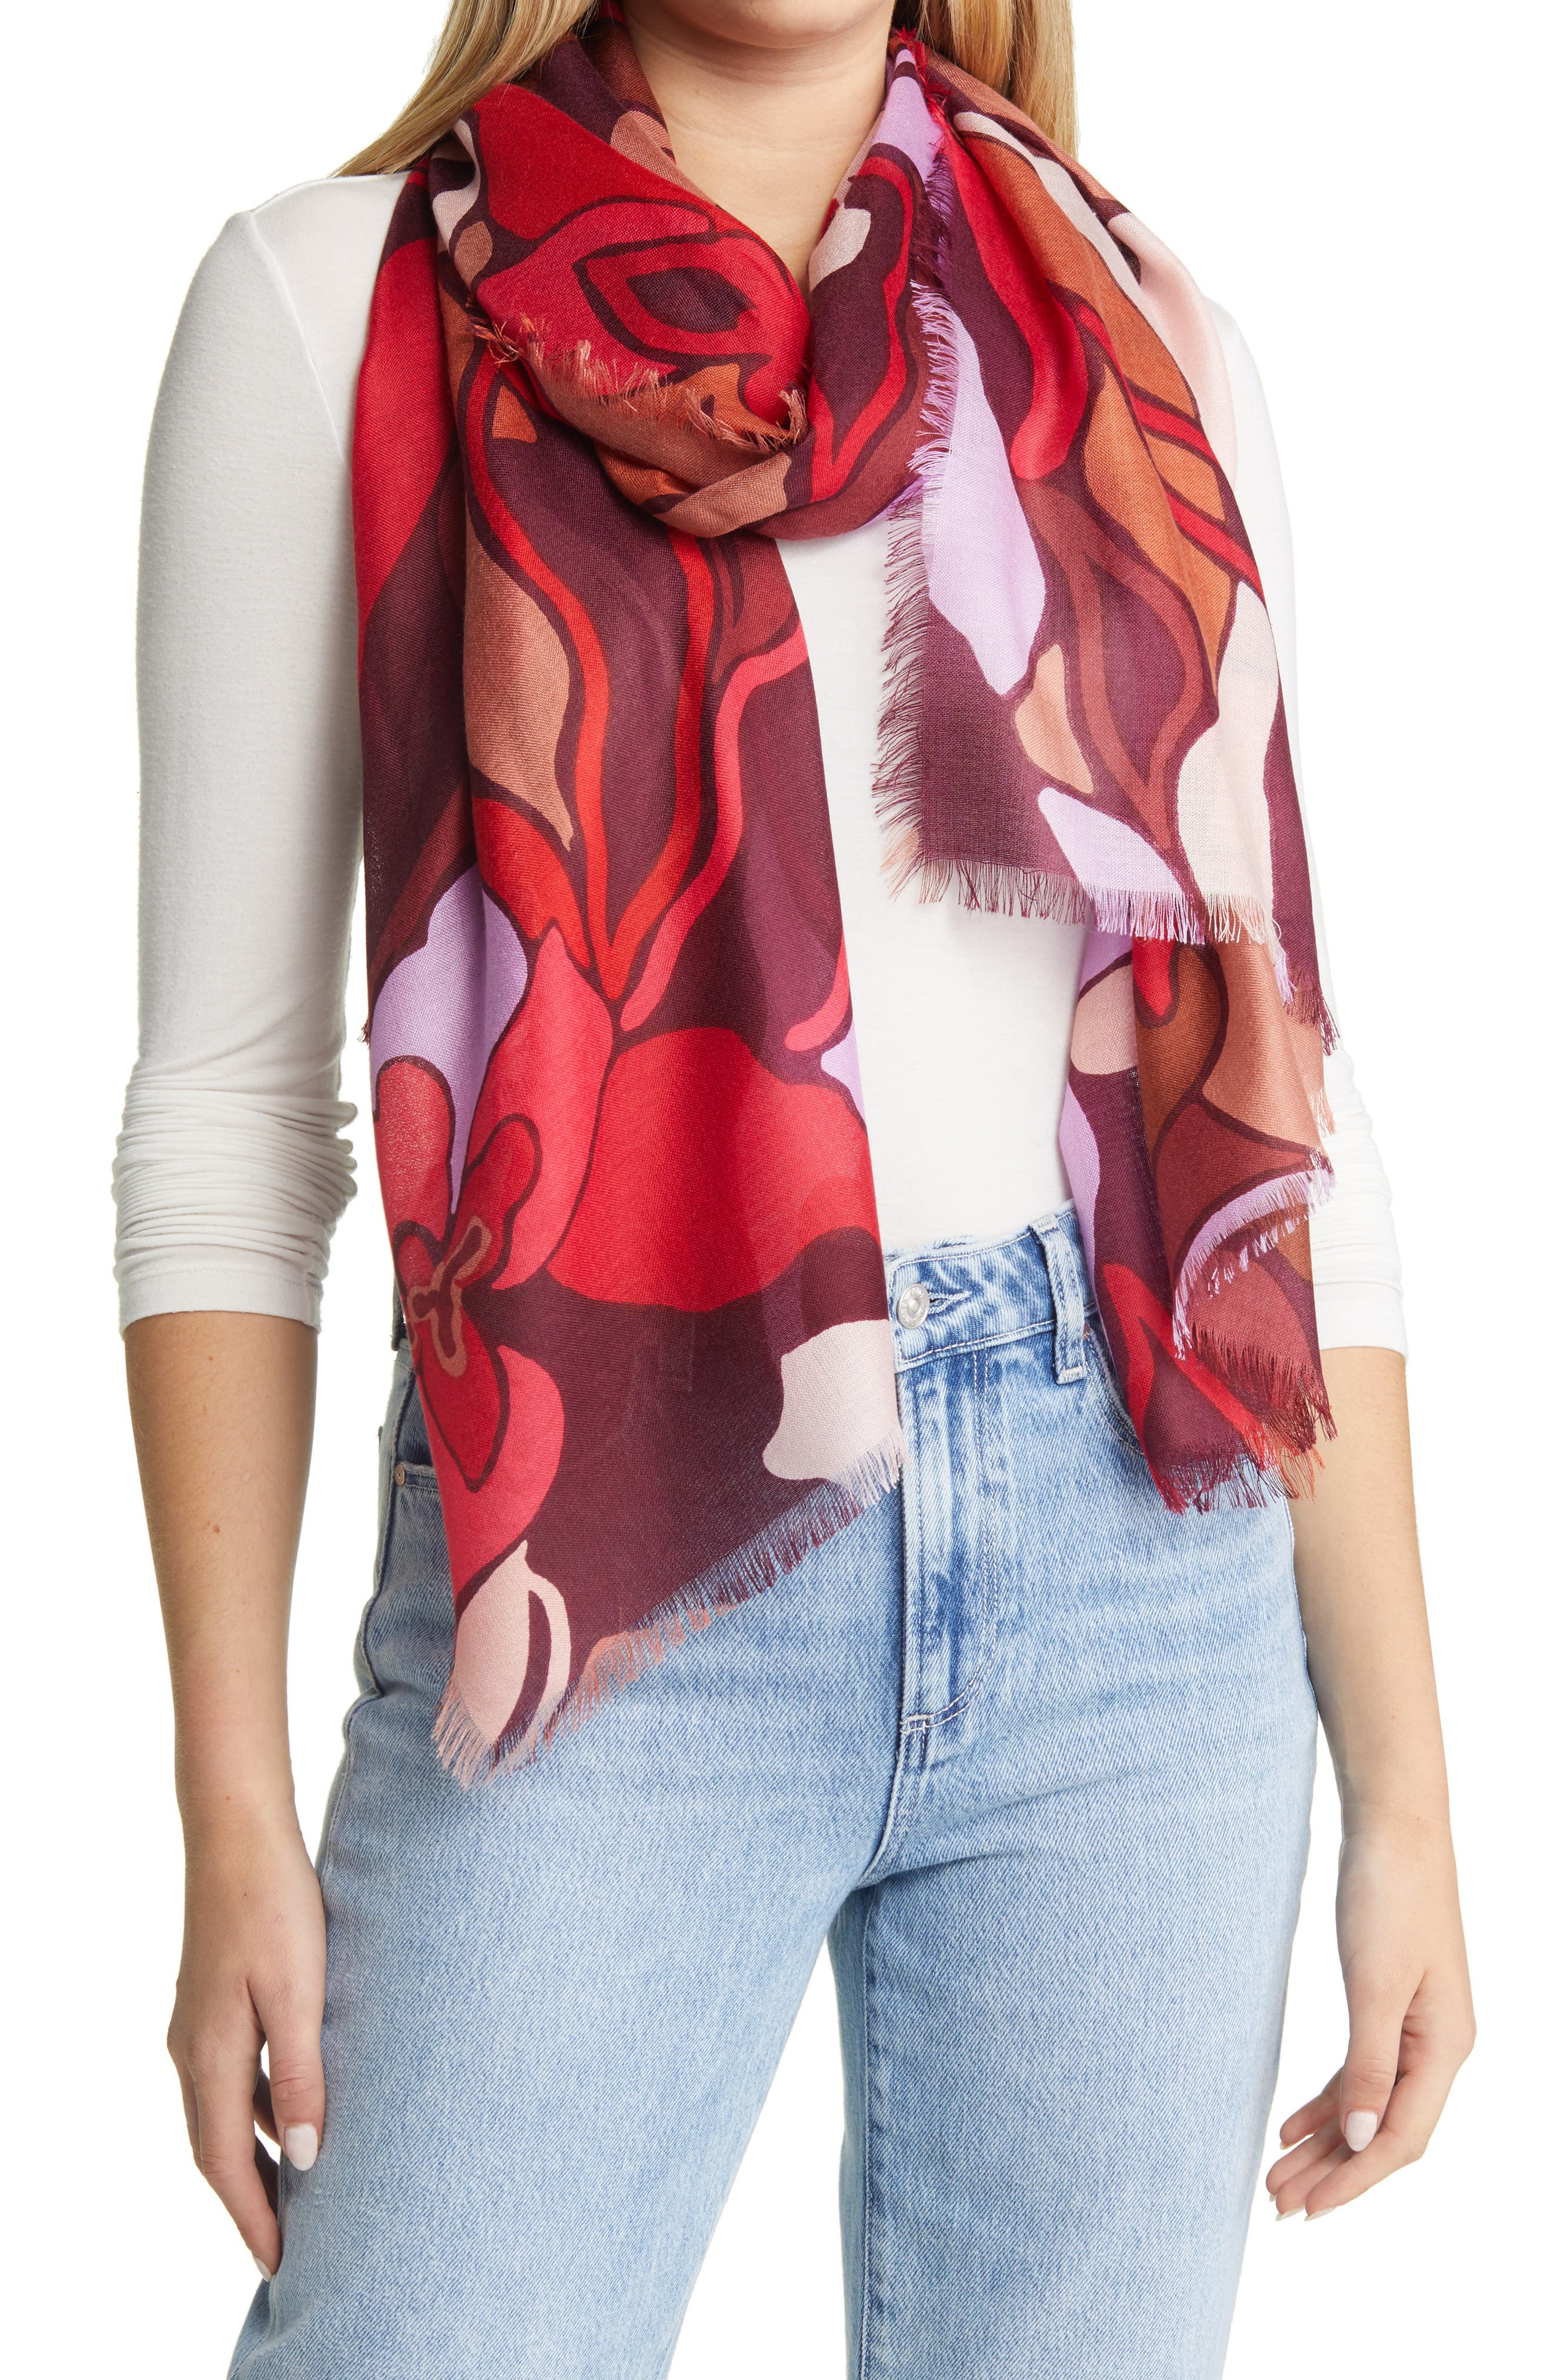 discount 69% Red/Beige Single WOMEN FASHION Accessories Shawl Red NoName Burgundy scarf and printed beige 